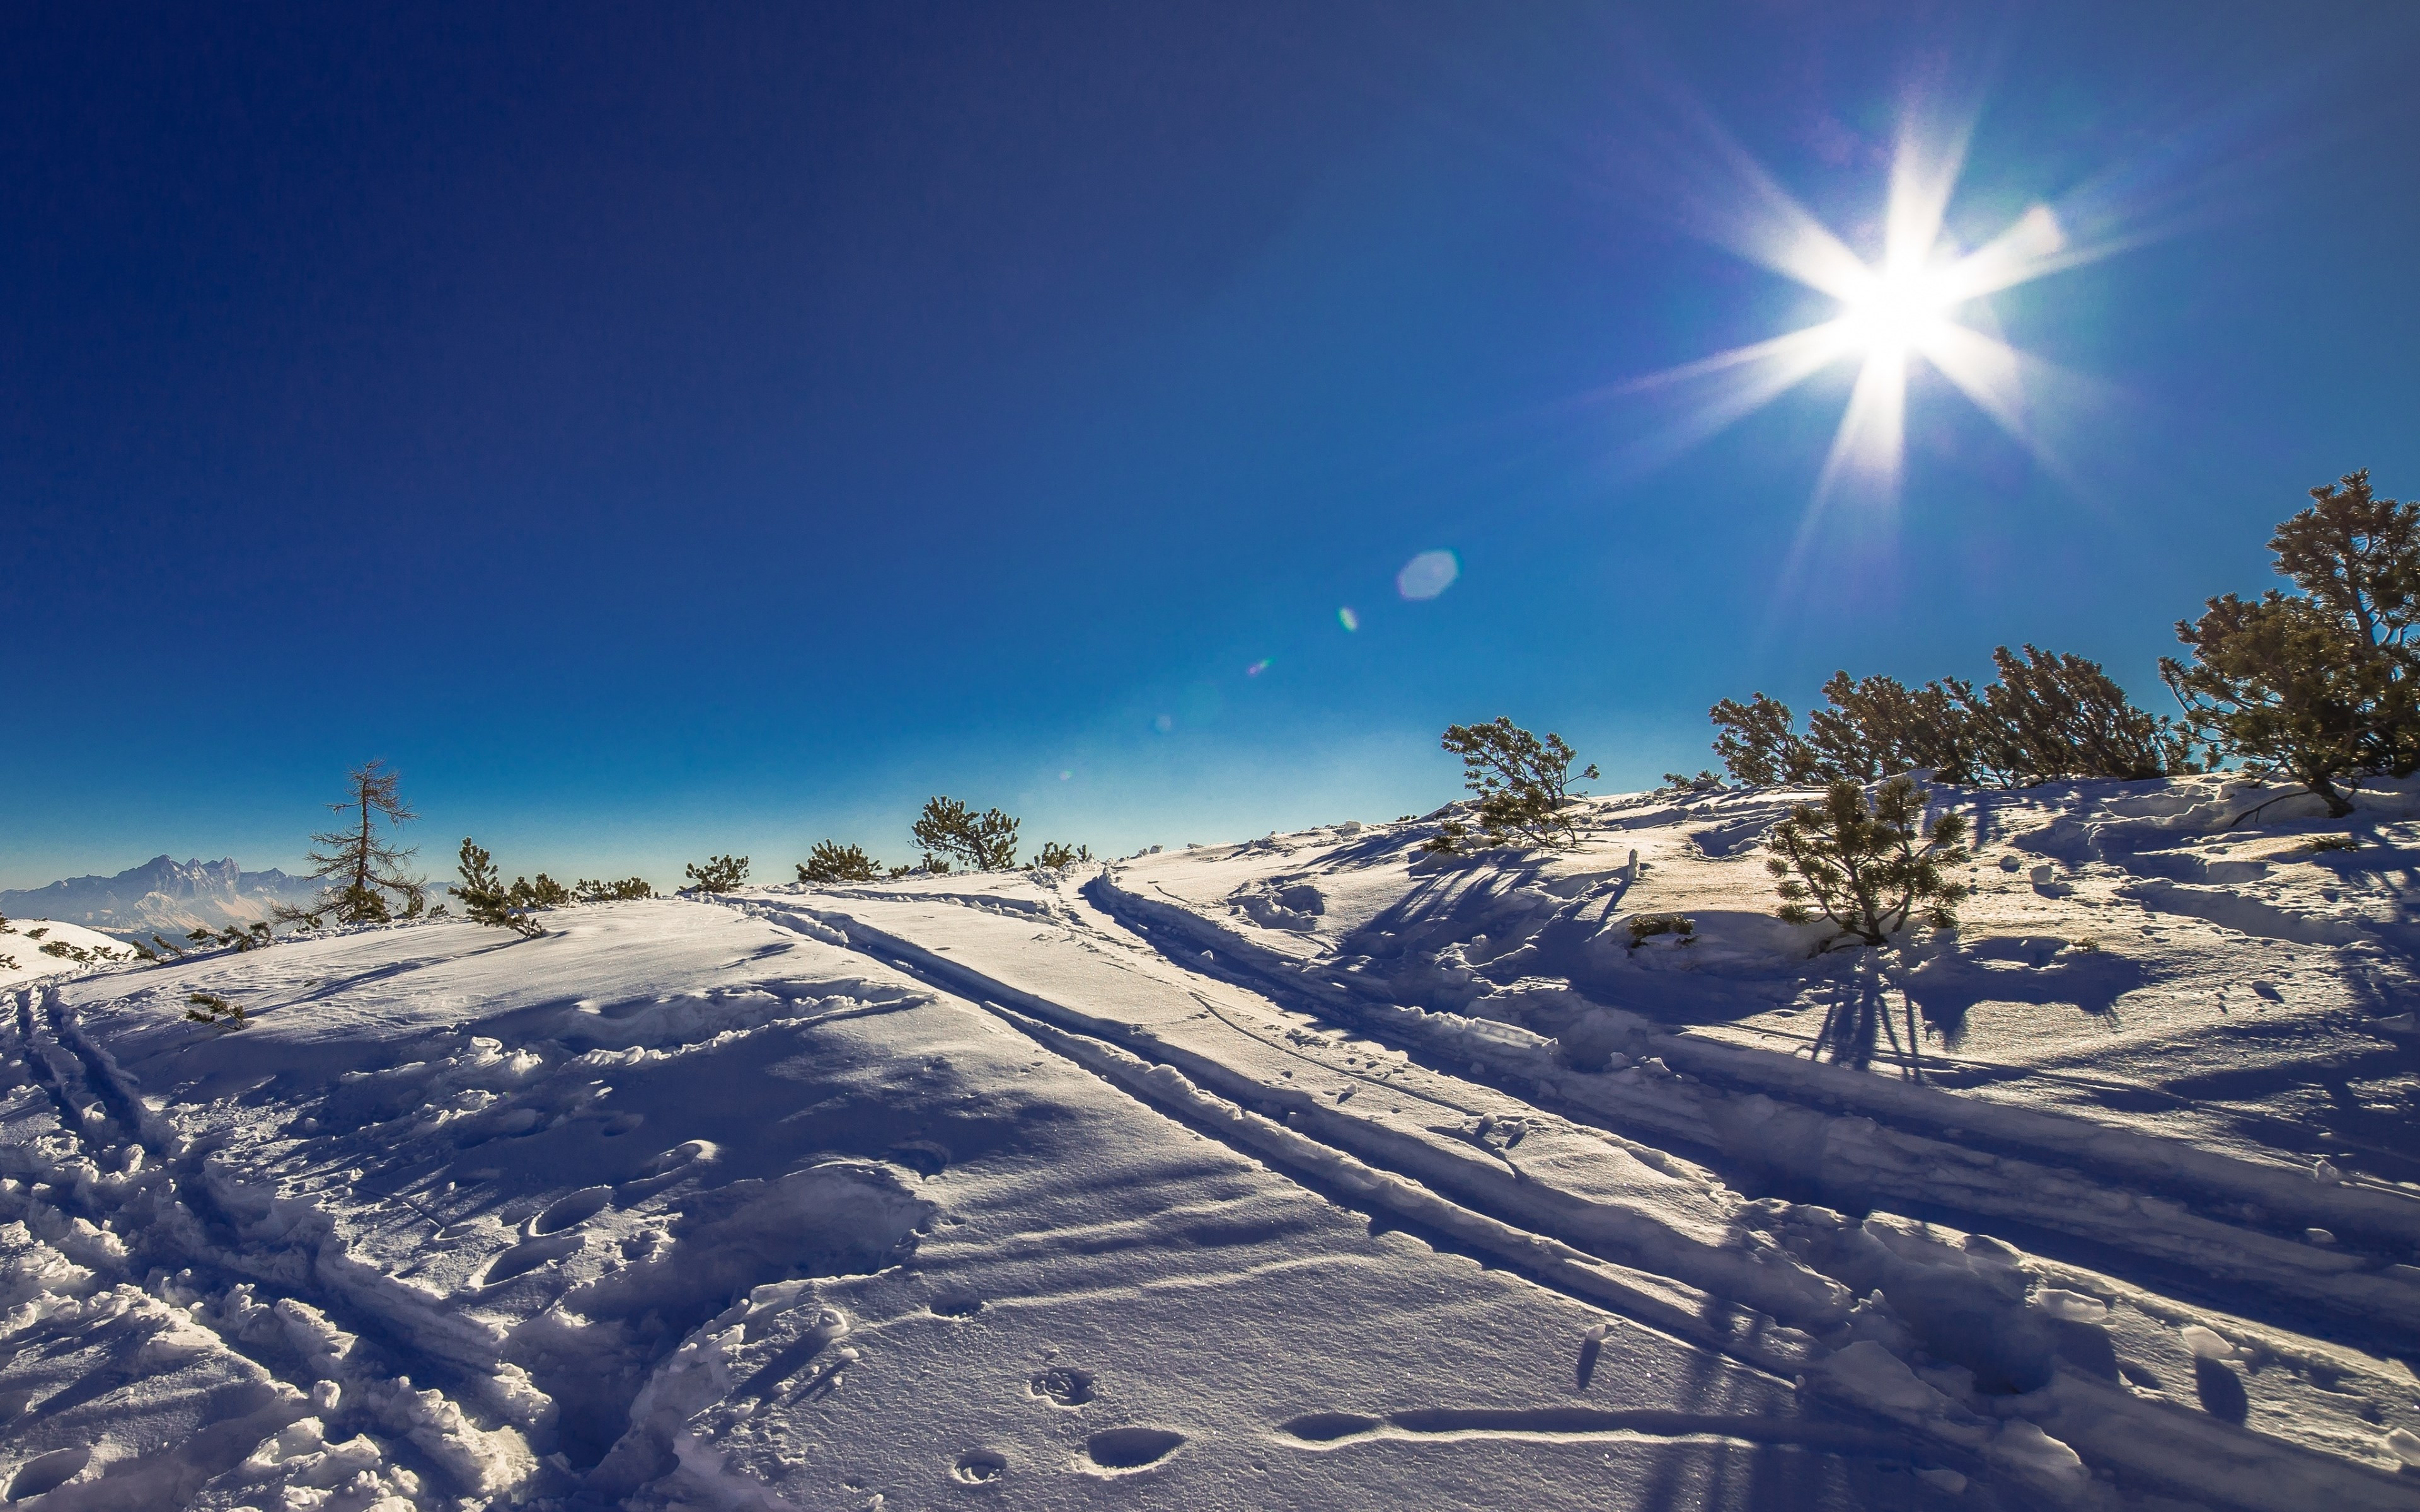 Sunny day in this Winter landscape wallpaper 3840x2400